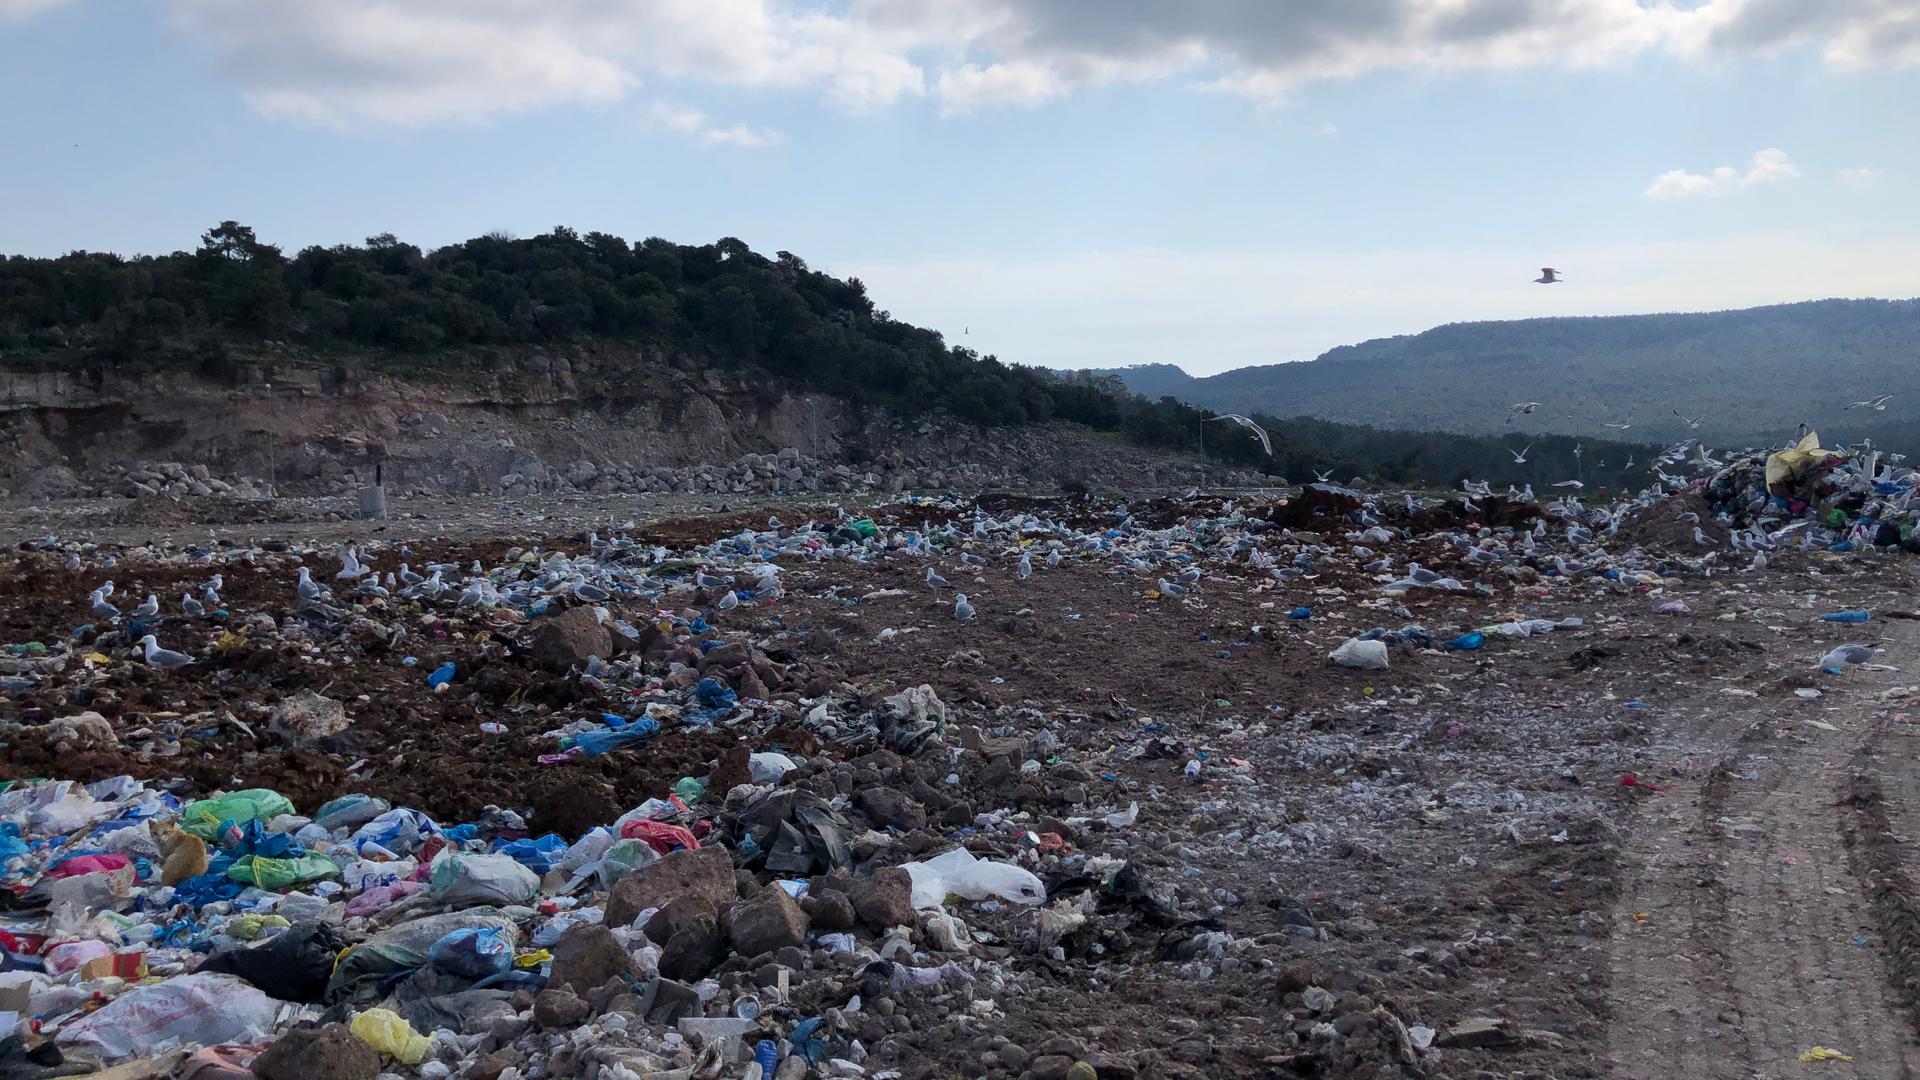 The new migrant facility on Lesbos will be built next to an active landfill, according to a map published by local media in the fall.